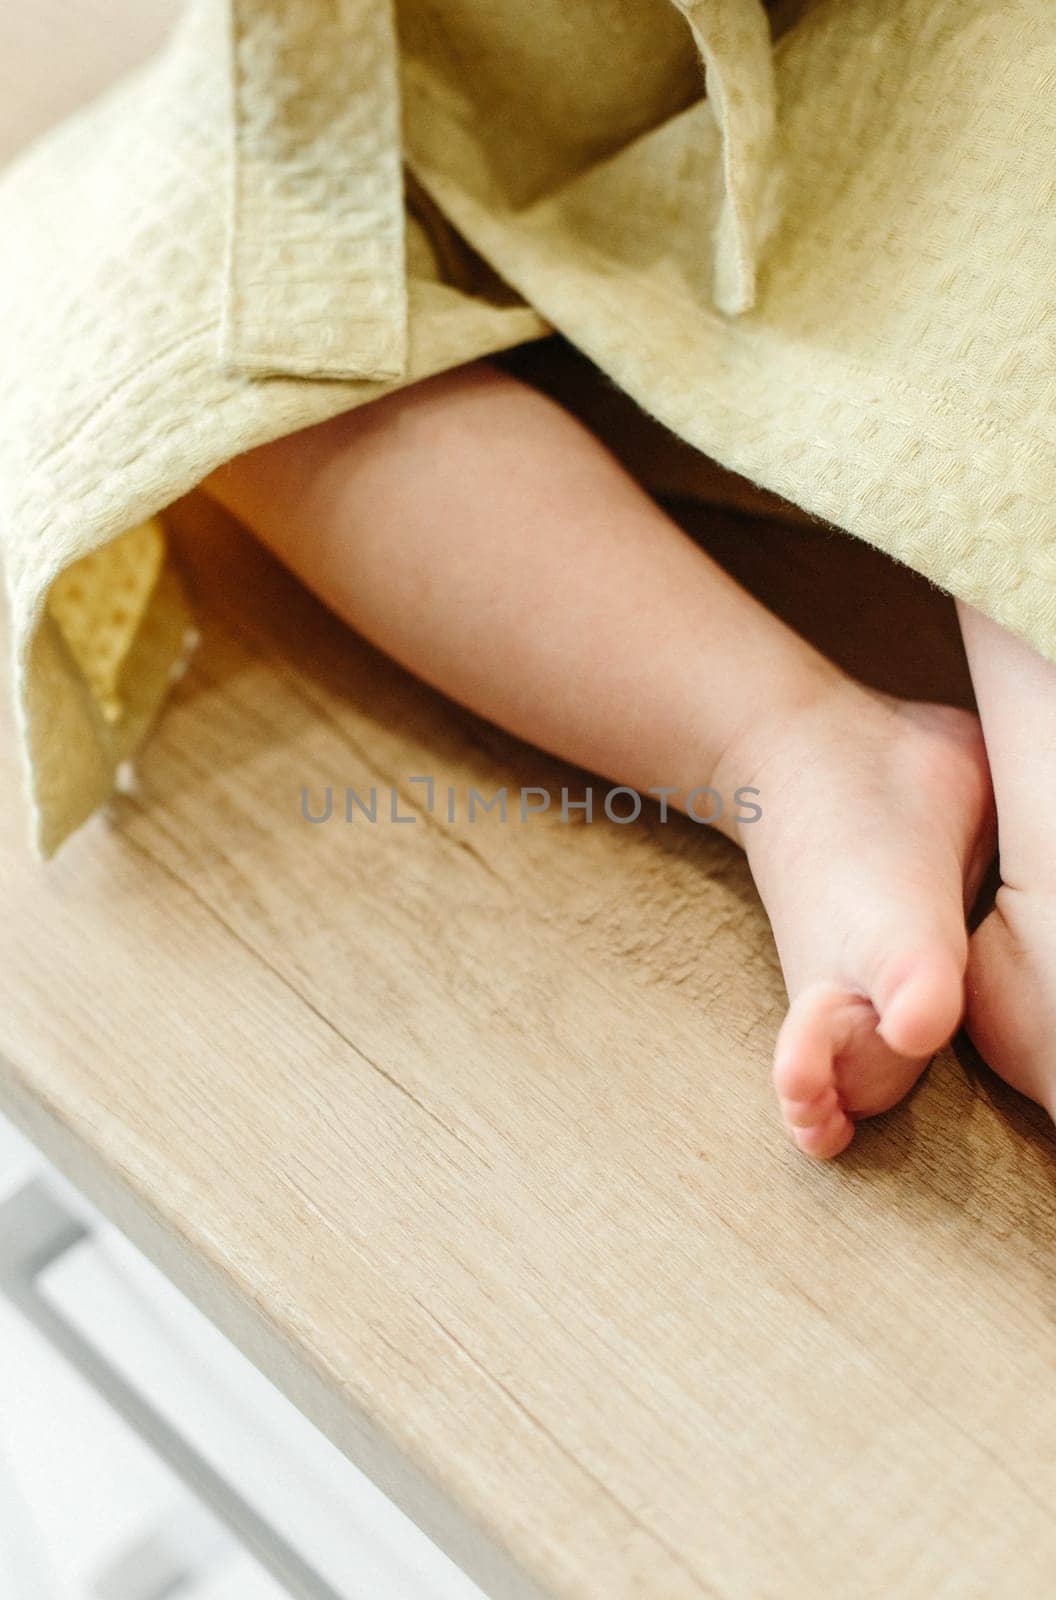 The child sits on the windowsill in a dressing gown, close-up of the legs.